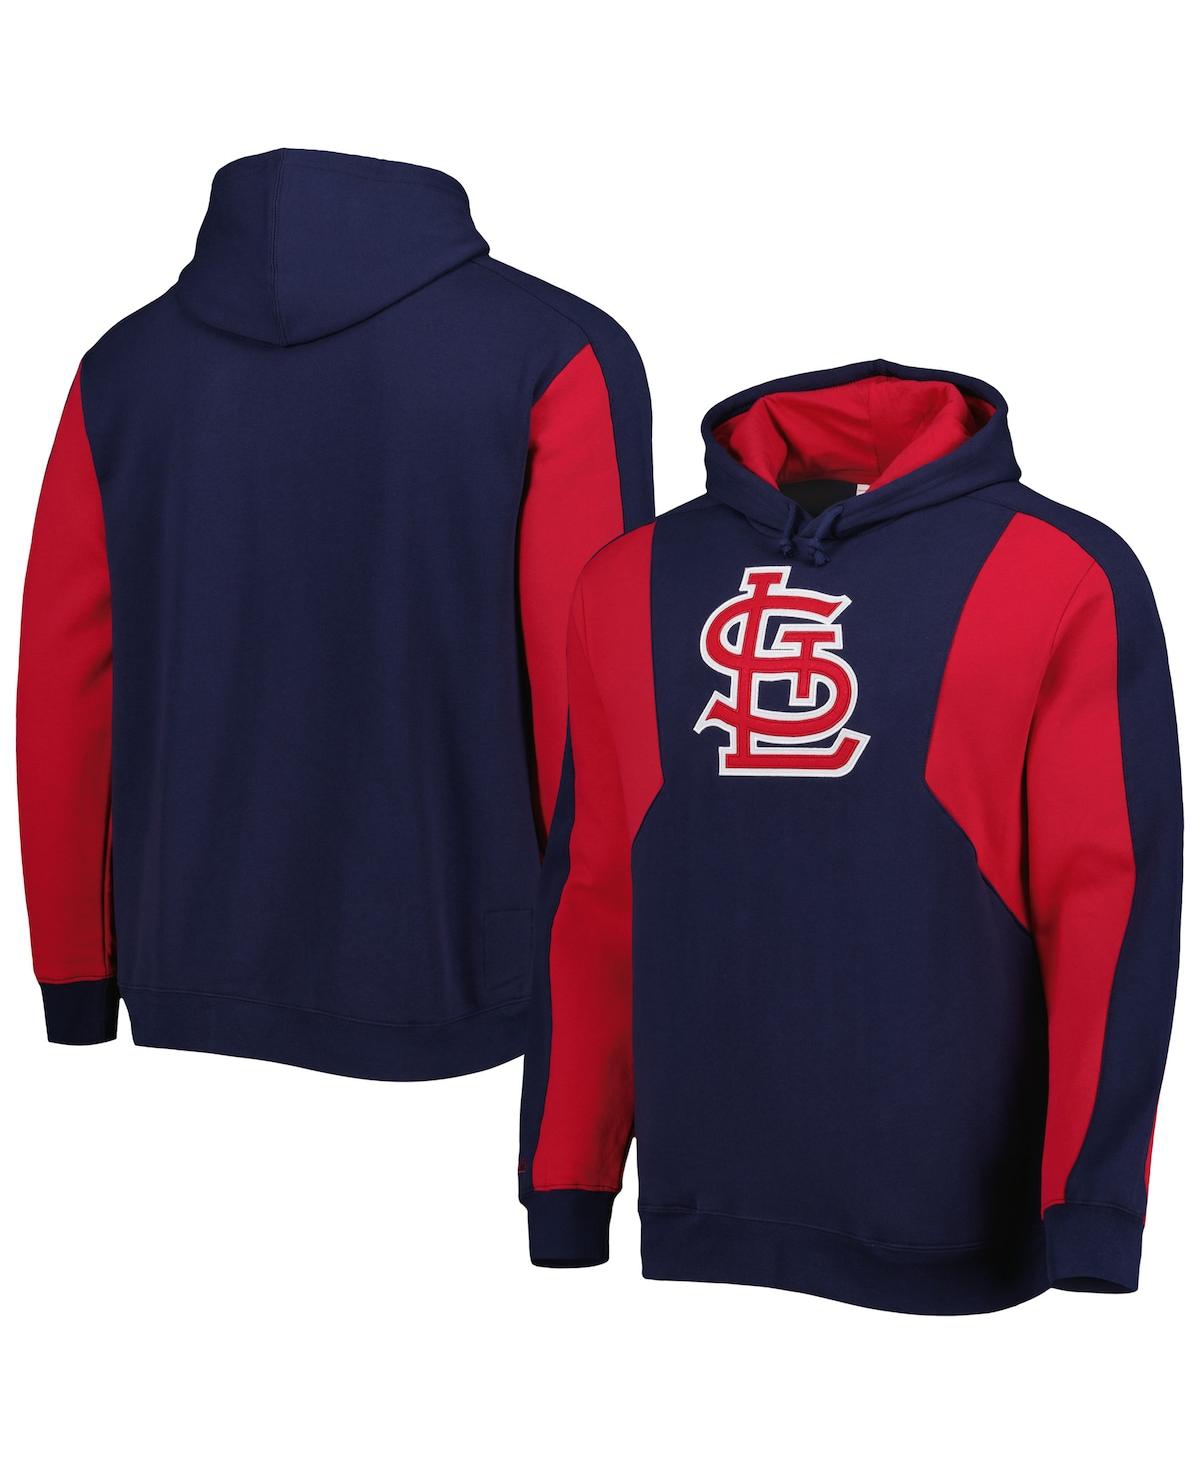 Mitchell & Ness Men's  Navy, Red St. Louis Cardinals Colorblocked Fleece Pullover Hoodie In Navy,red